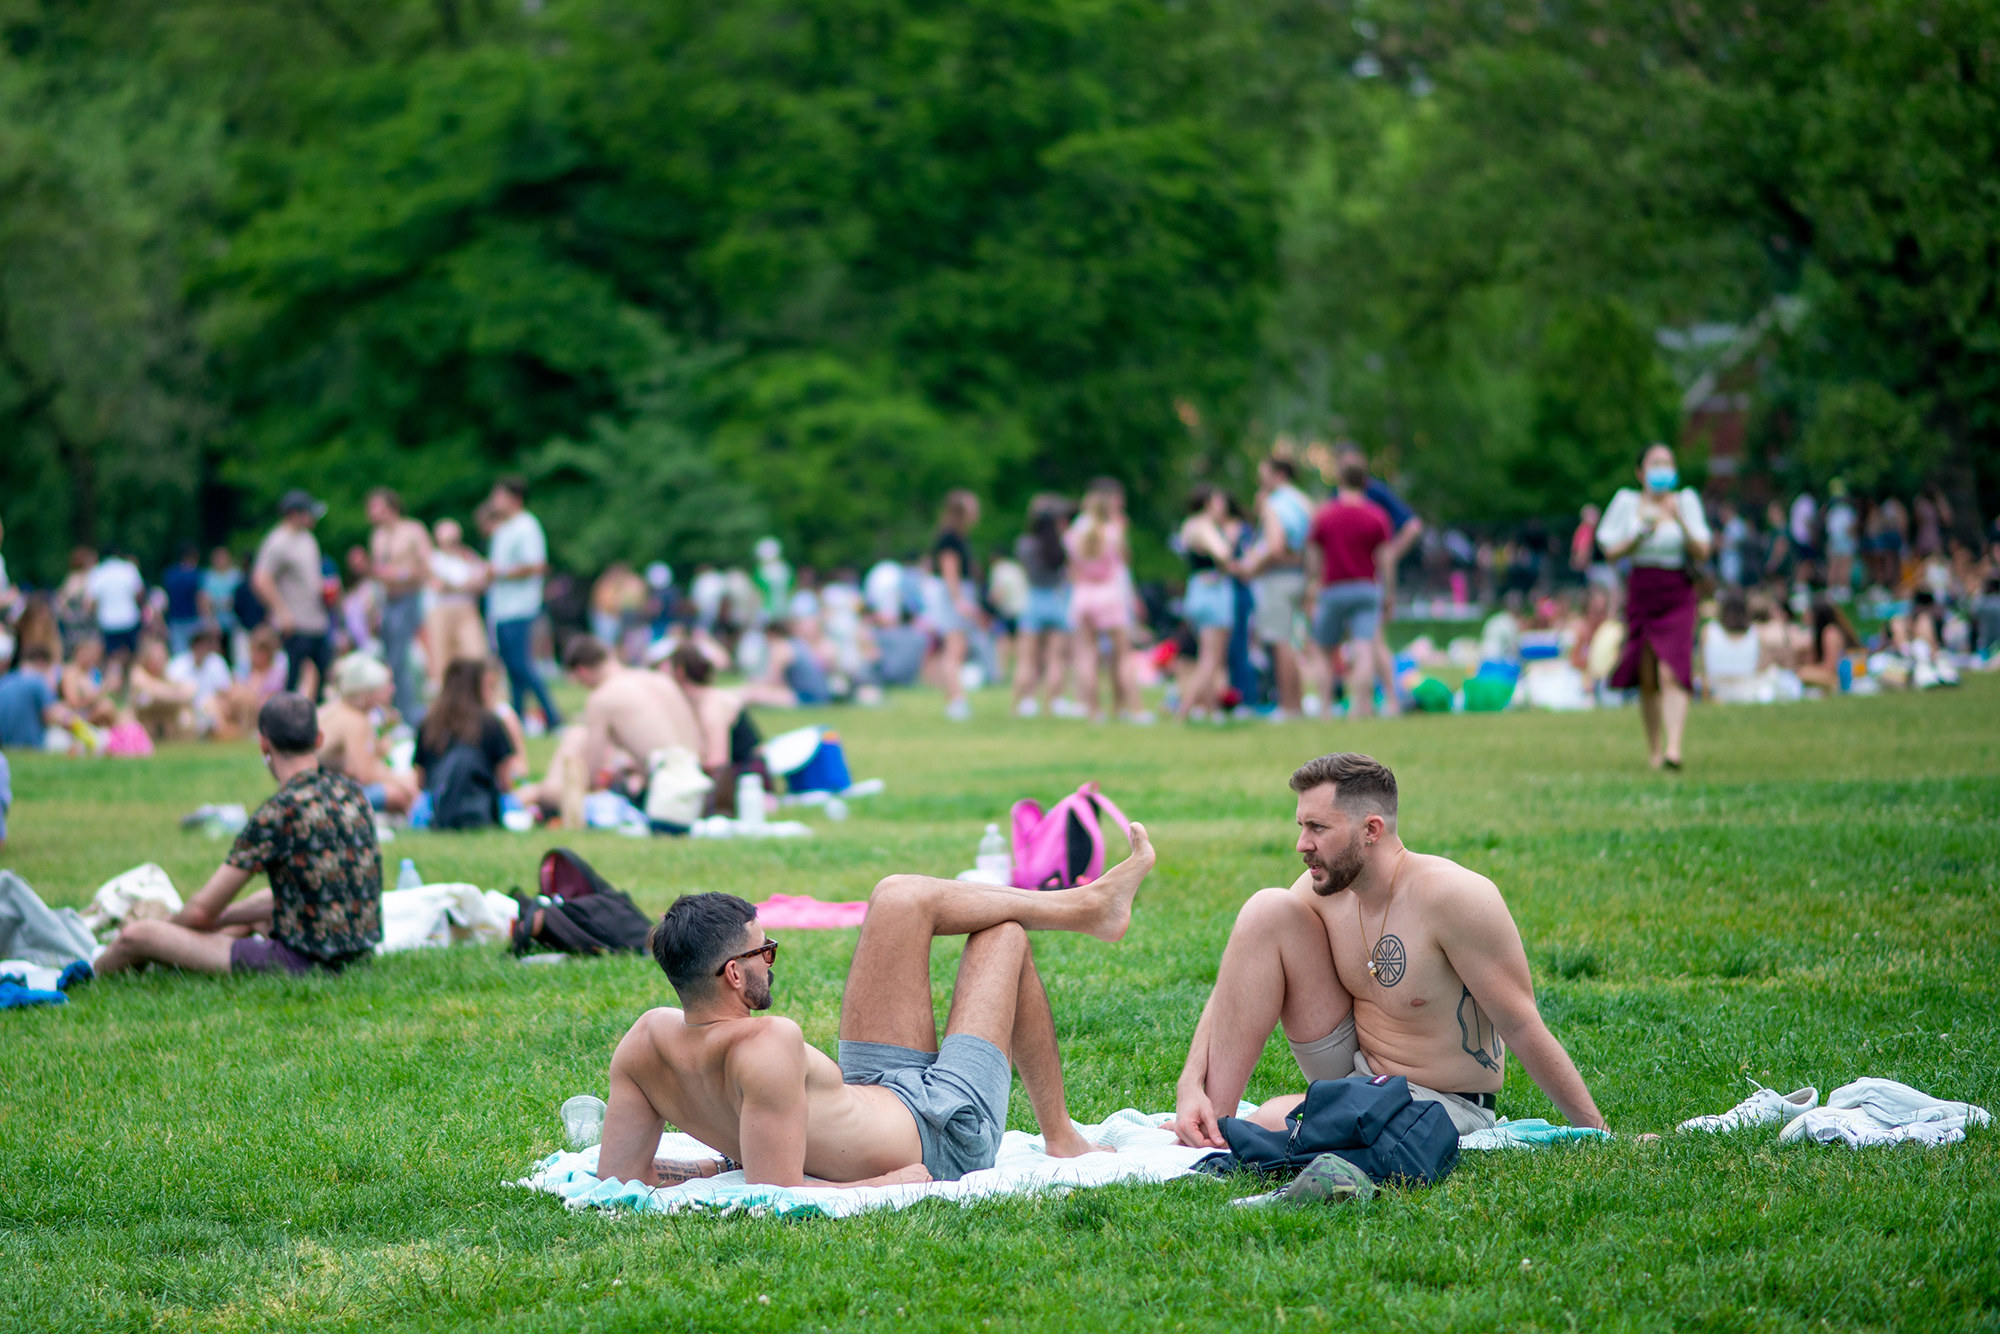 Two shirtless men lounge in the forefront with a huge crowd of people behind them in a park 